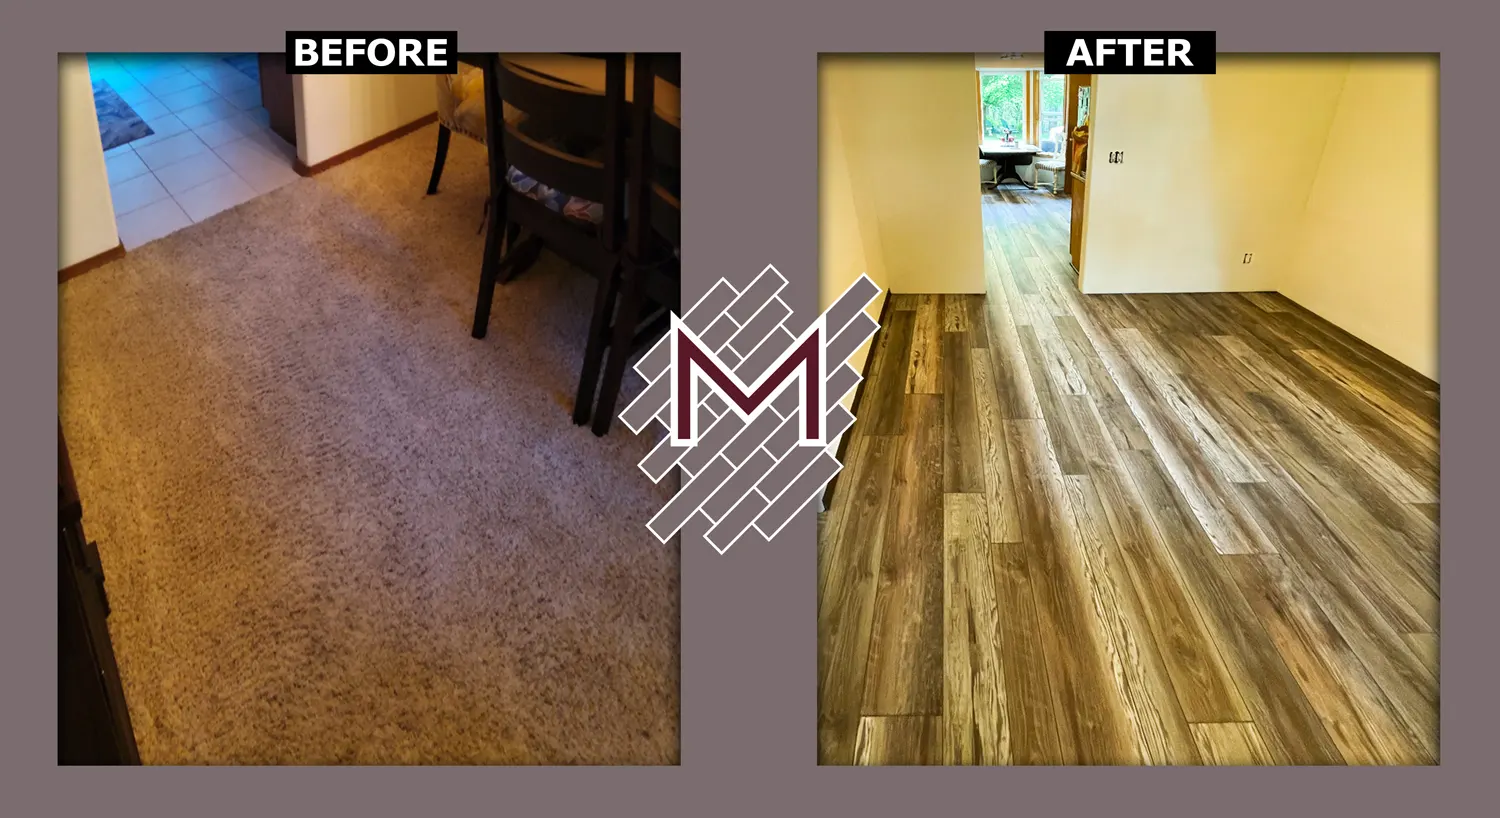 Before and after picture showing the old carpet flooring and new vinyl flooring installed. New flooring installation by Modern Flooring Services.